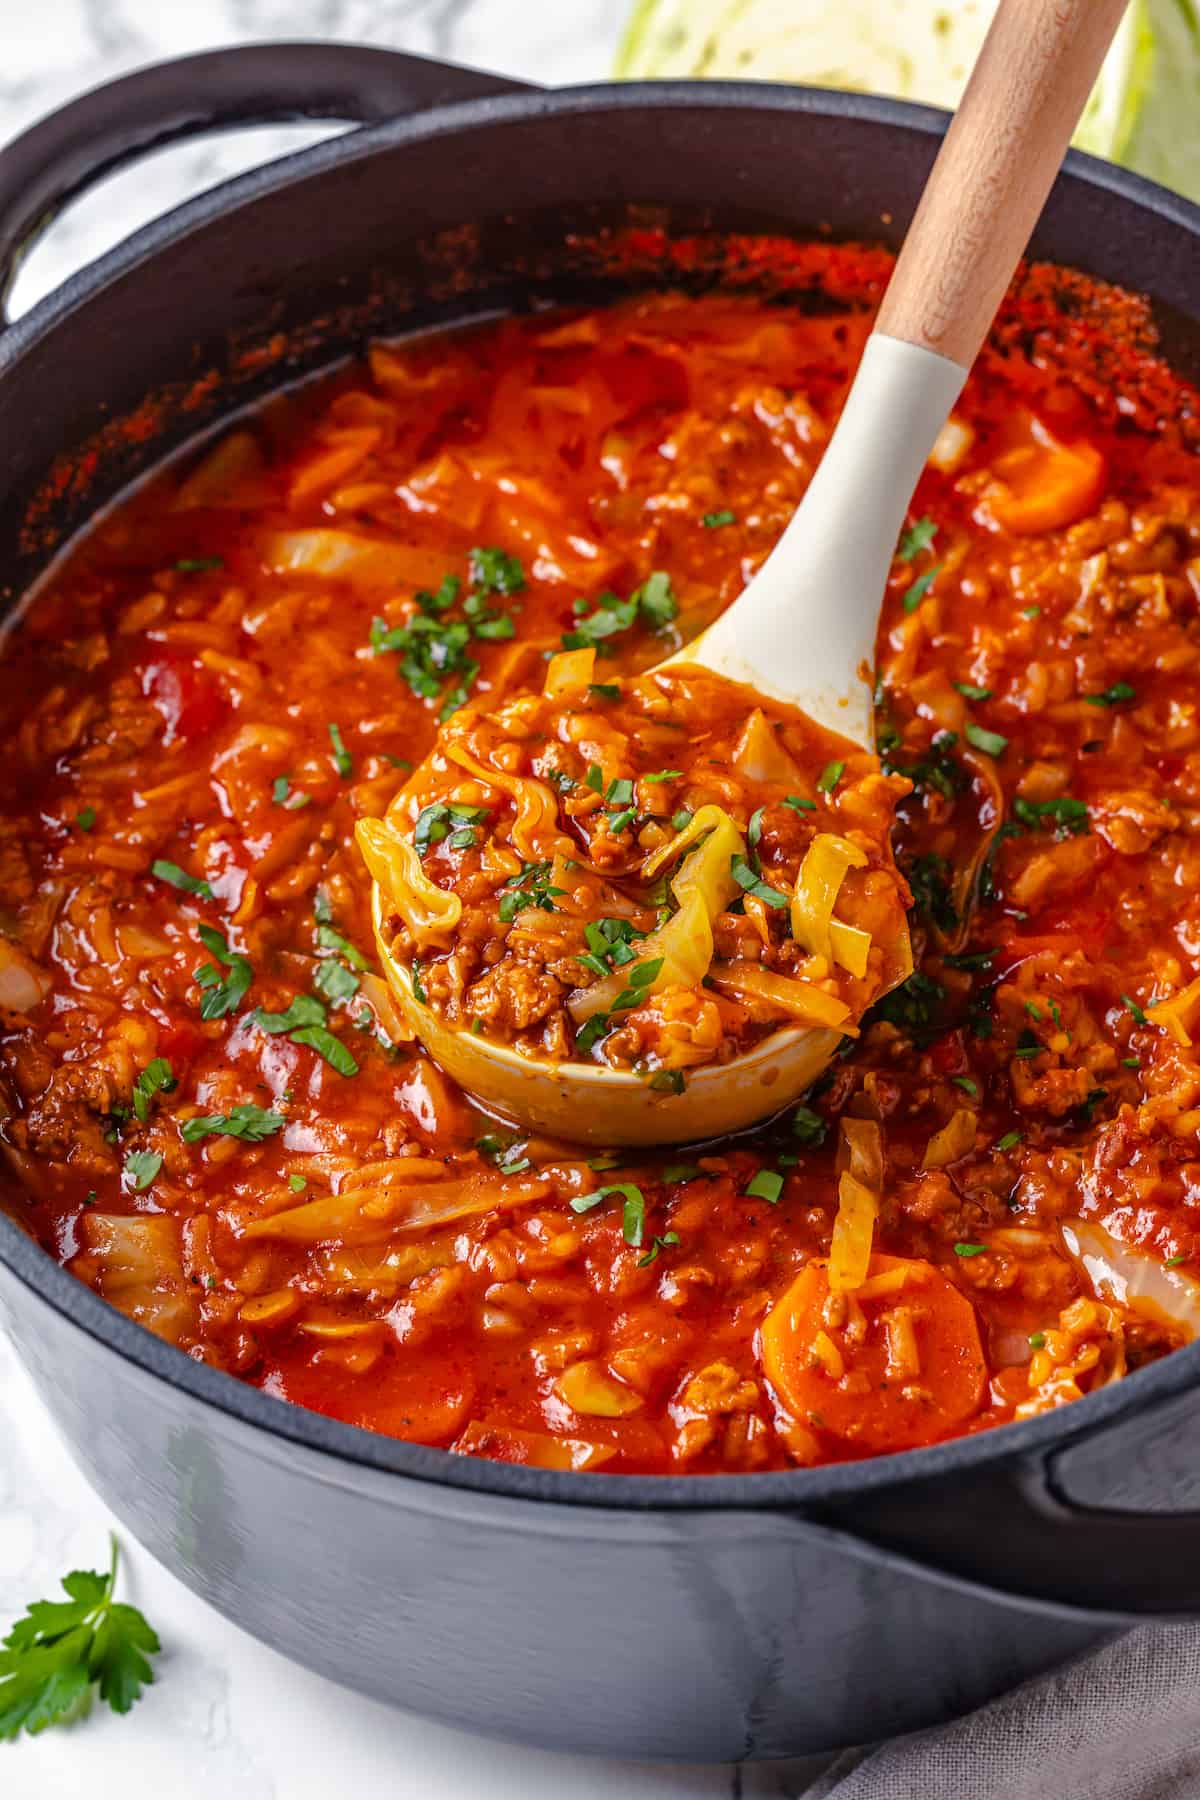 Ladle of cabbage roll soup in pot